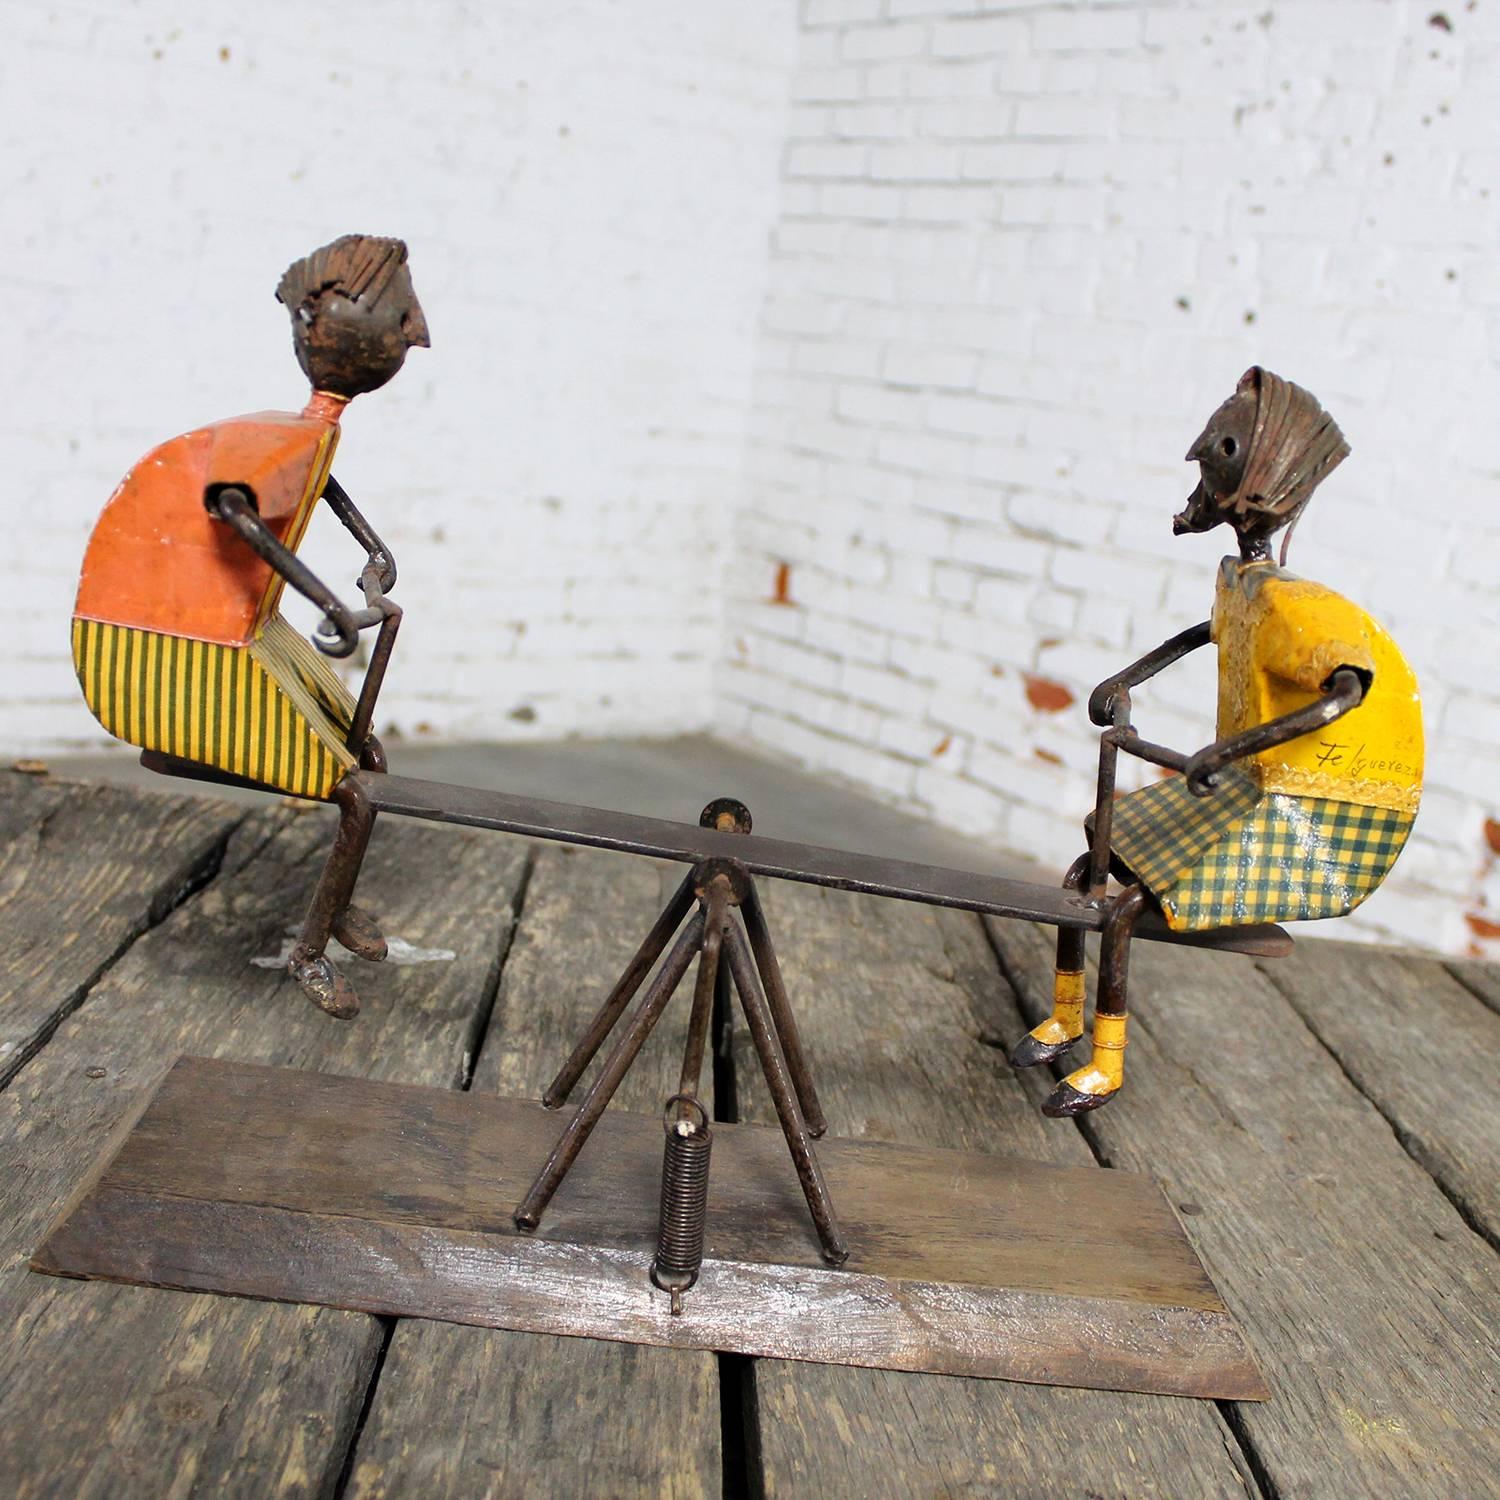 Incredible Mid-Century Modern sculpture by Manuel Felguerez depicting two children, a boy and a girl, on a see saw. Mounted on a wood base and in wonderful vintage condition, circa 1964.

This sculpture by Manuel Felguerez just makes me smile! The